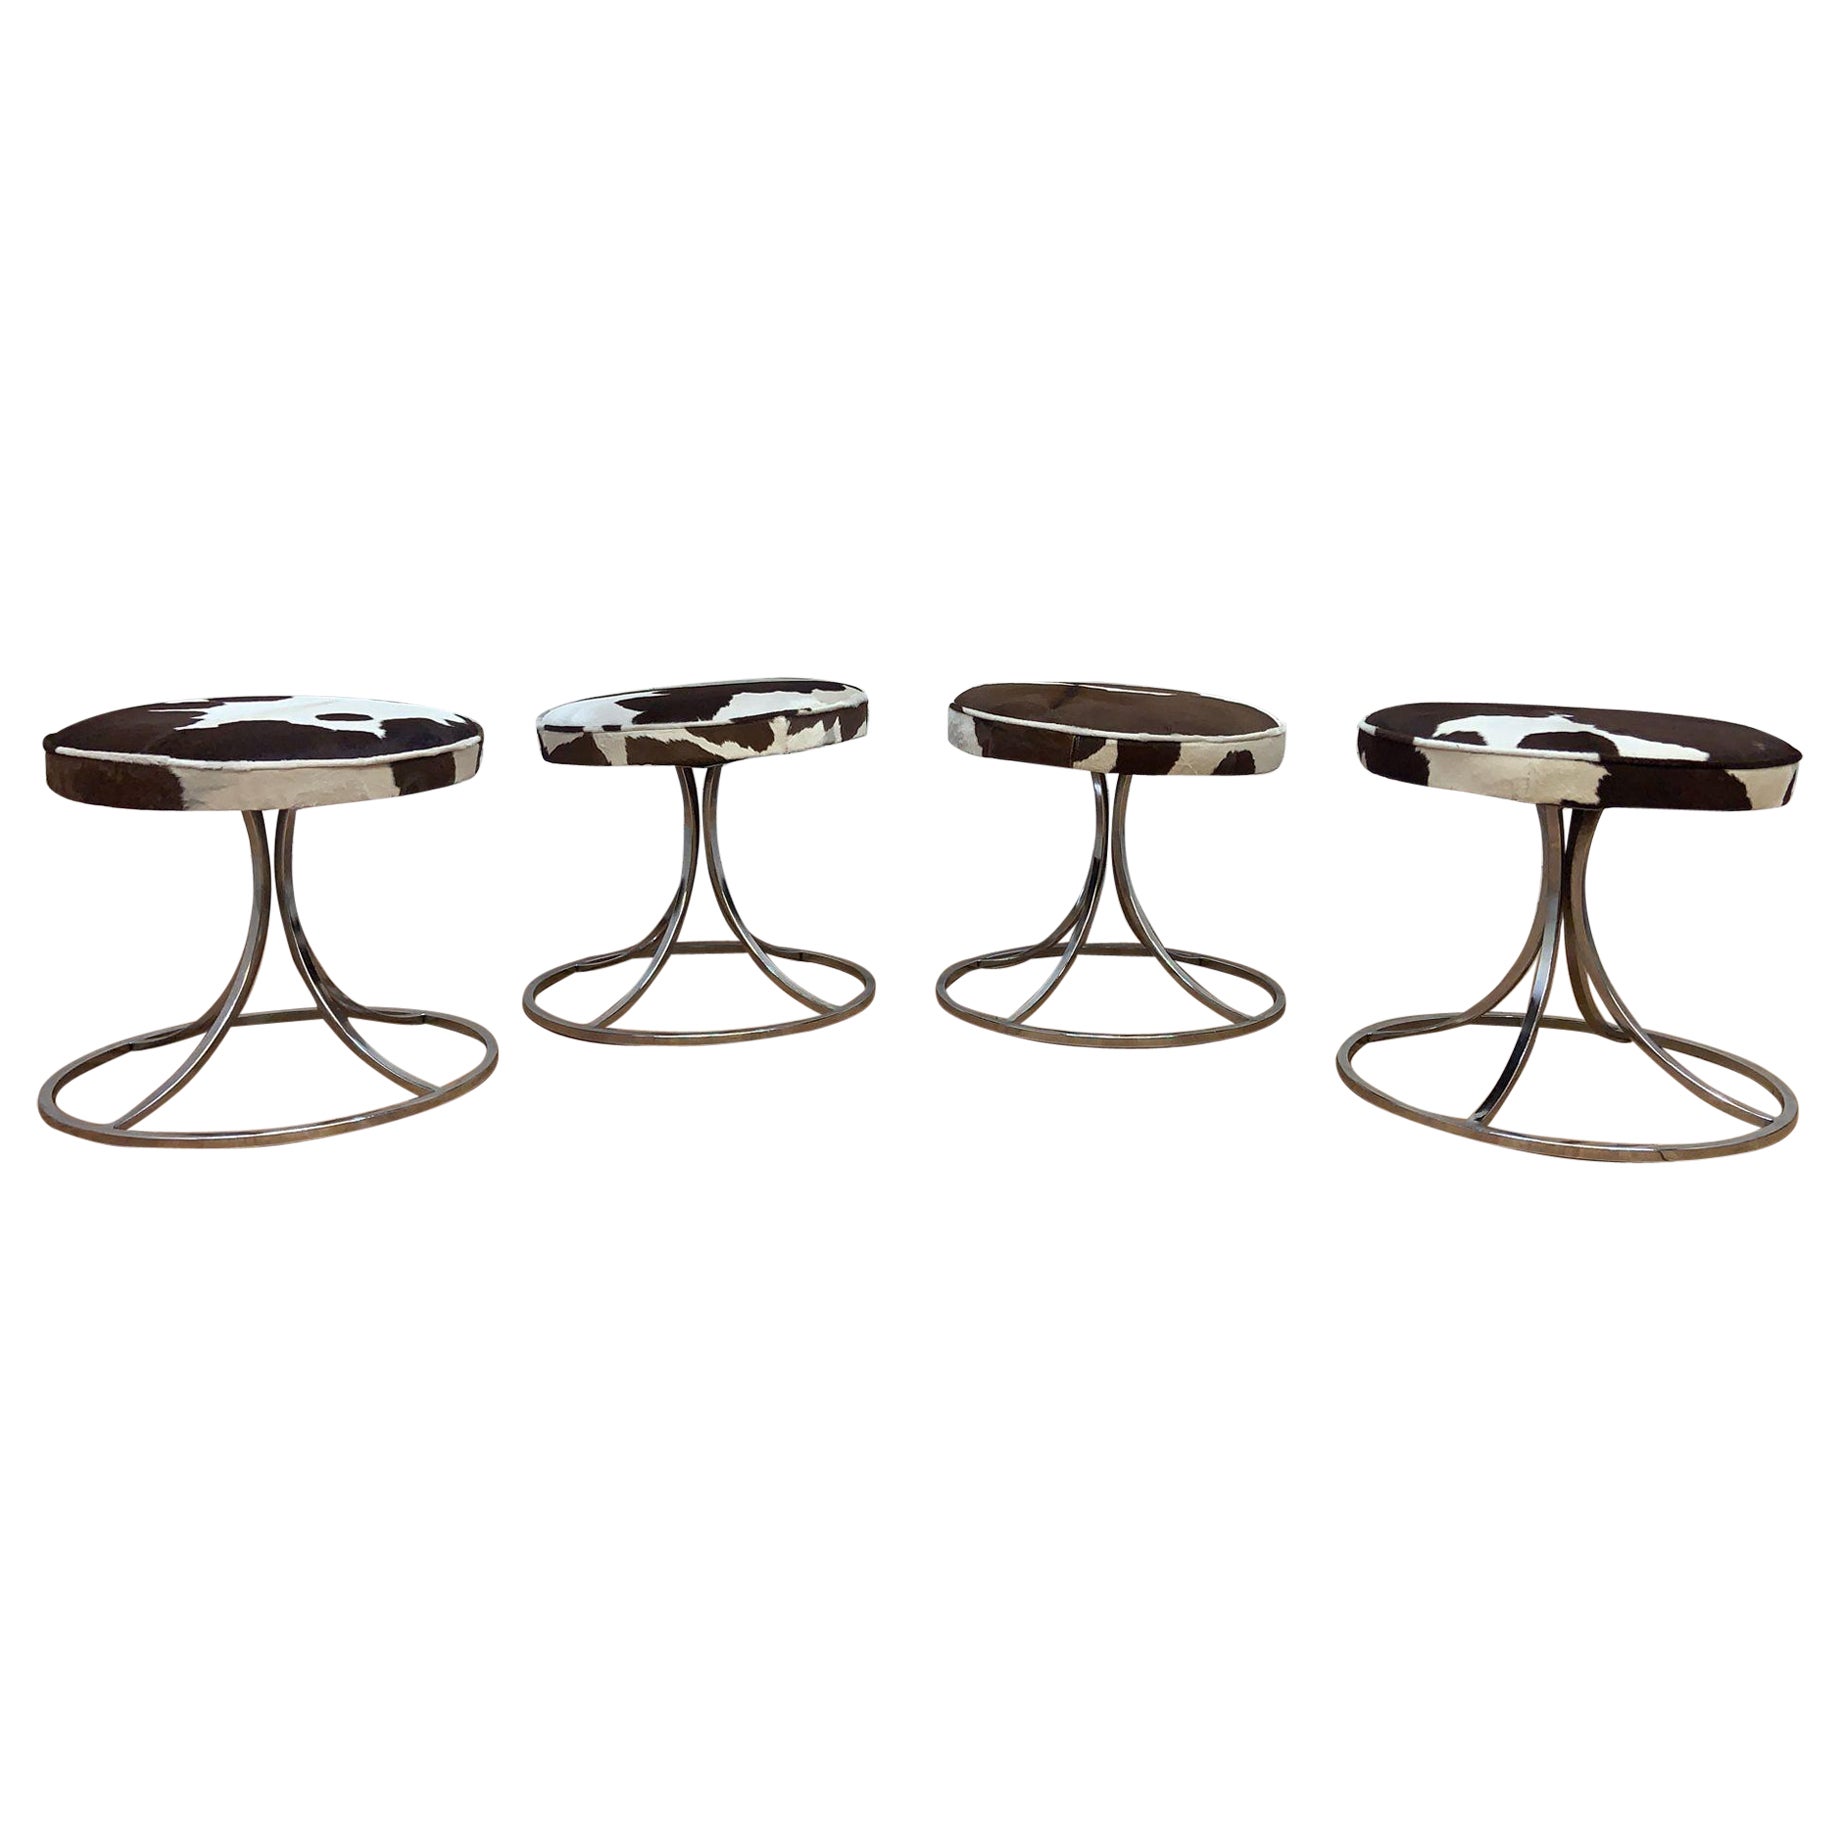 Avard Style Chrome Swivel Base Stools Newly Upholstered in Cowhide - Set of 4 For Sale